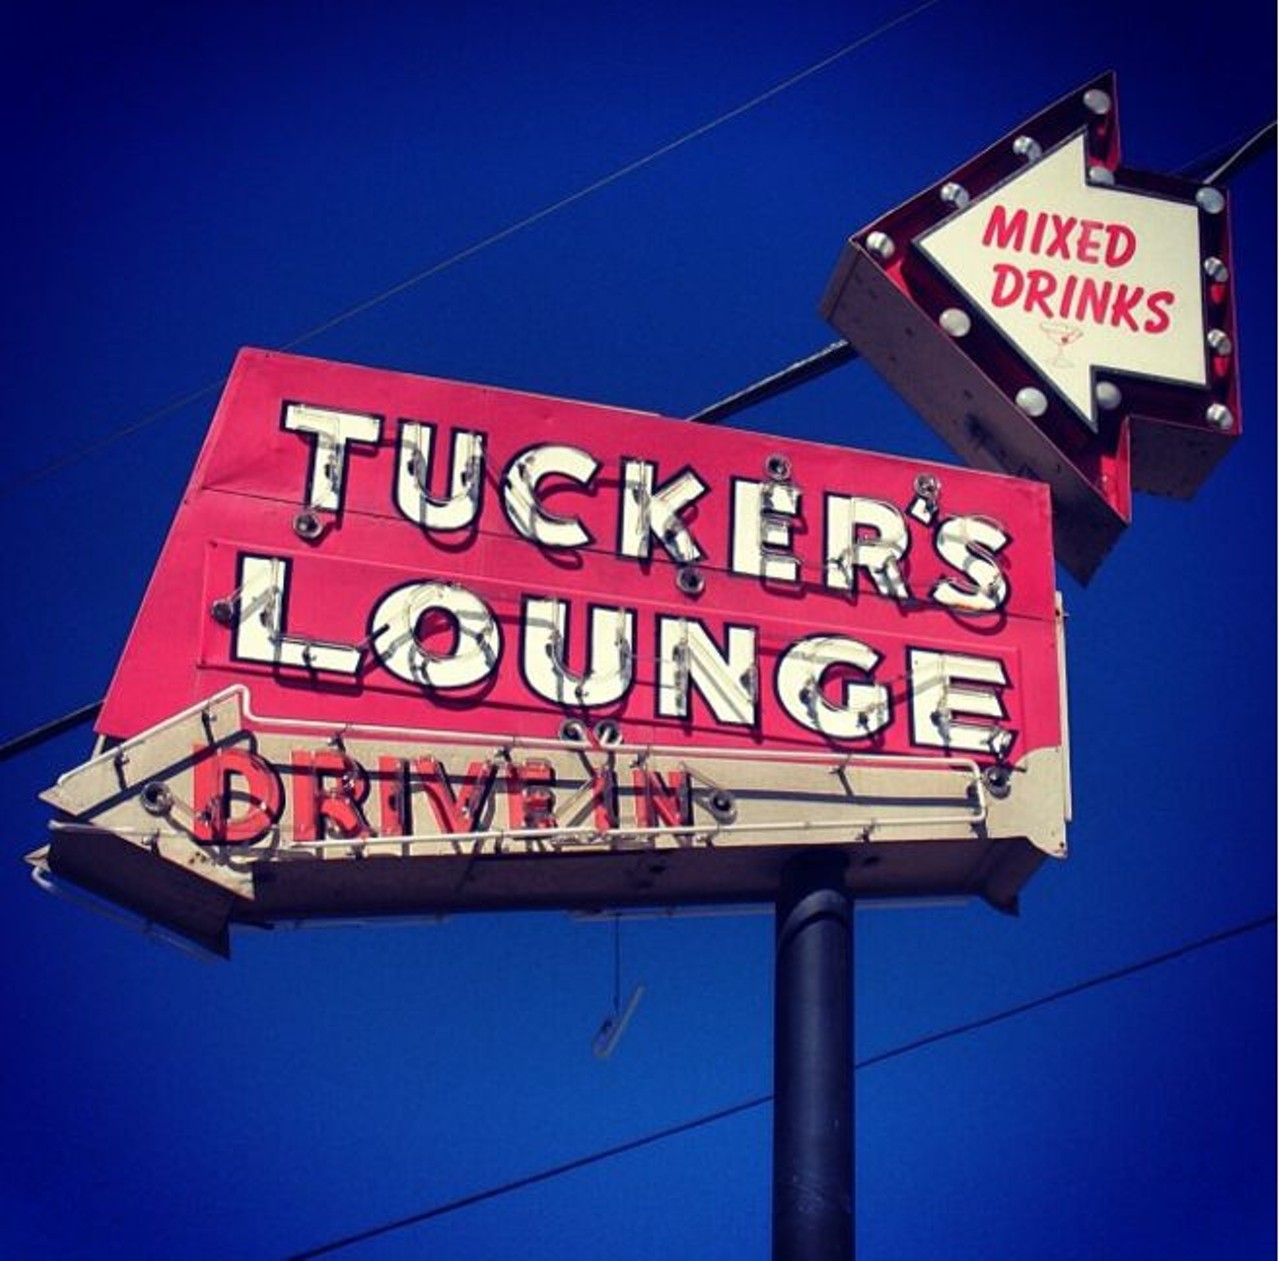 Tucker's Kozy Korner
1338 E. Houston St., (726) 999-3764, facebook.com/tuckersbarsa.
This East Side staple originally opened in 1948, and it's since become a San Antonio cocktail and music institution that draws patrons from all over the city. This cozy lounge makes a history-filled backdrop for classic cocktails, a dozen domestic and imported beers and wine by the glass.
Photo via Instagram /  clive78757